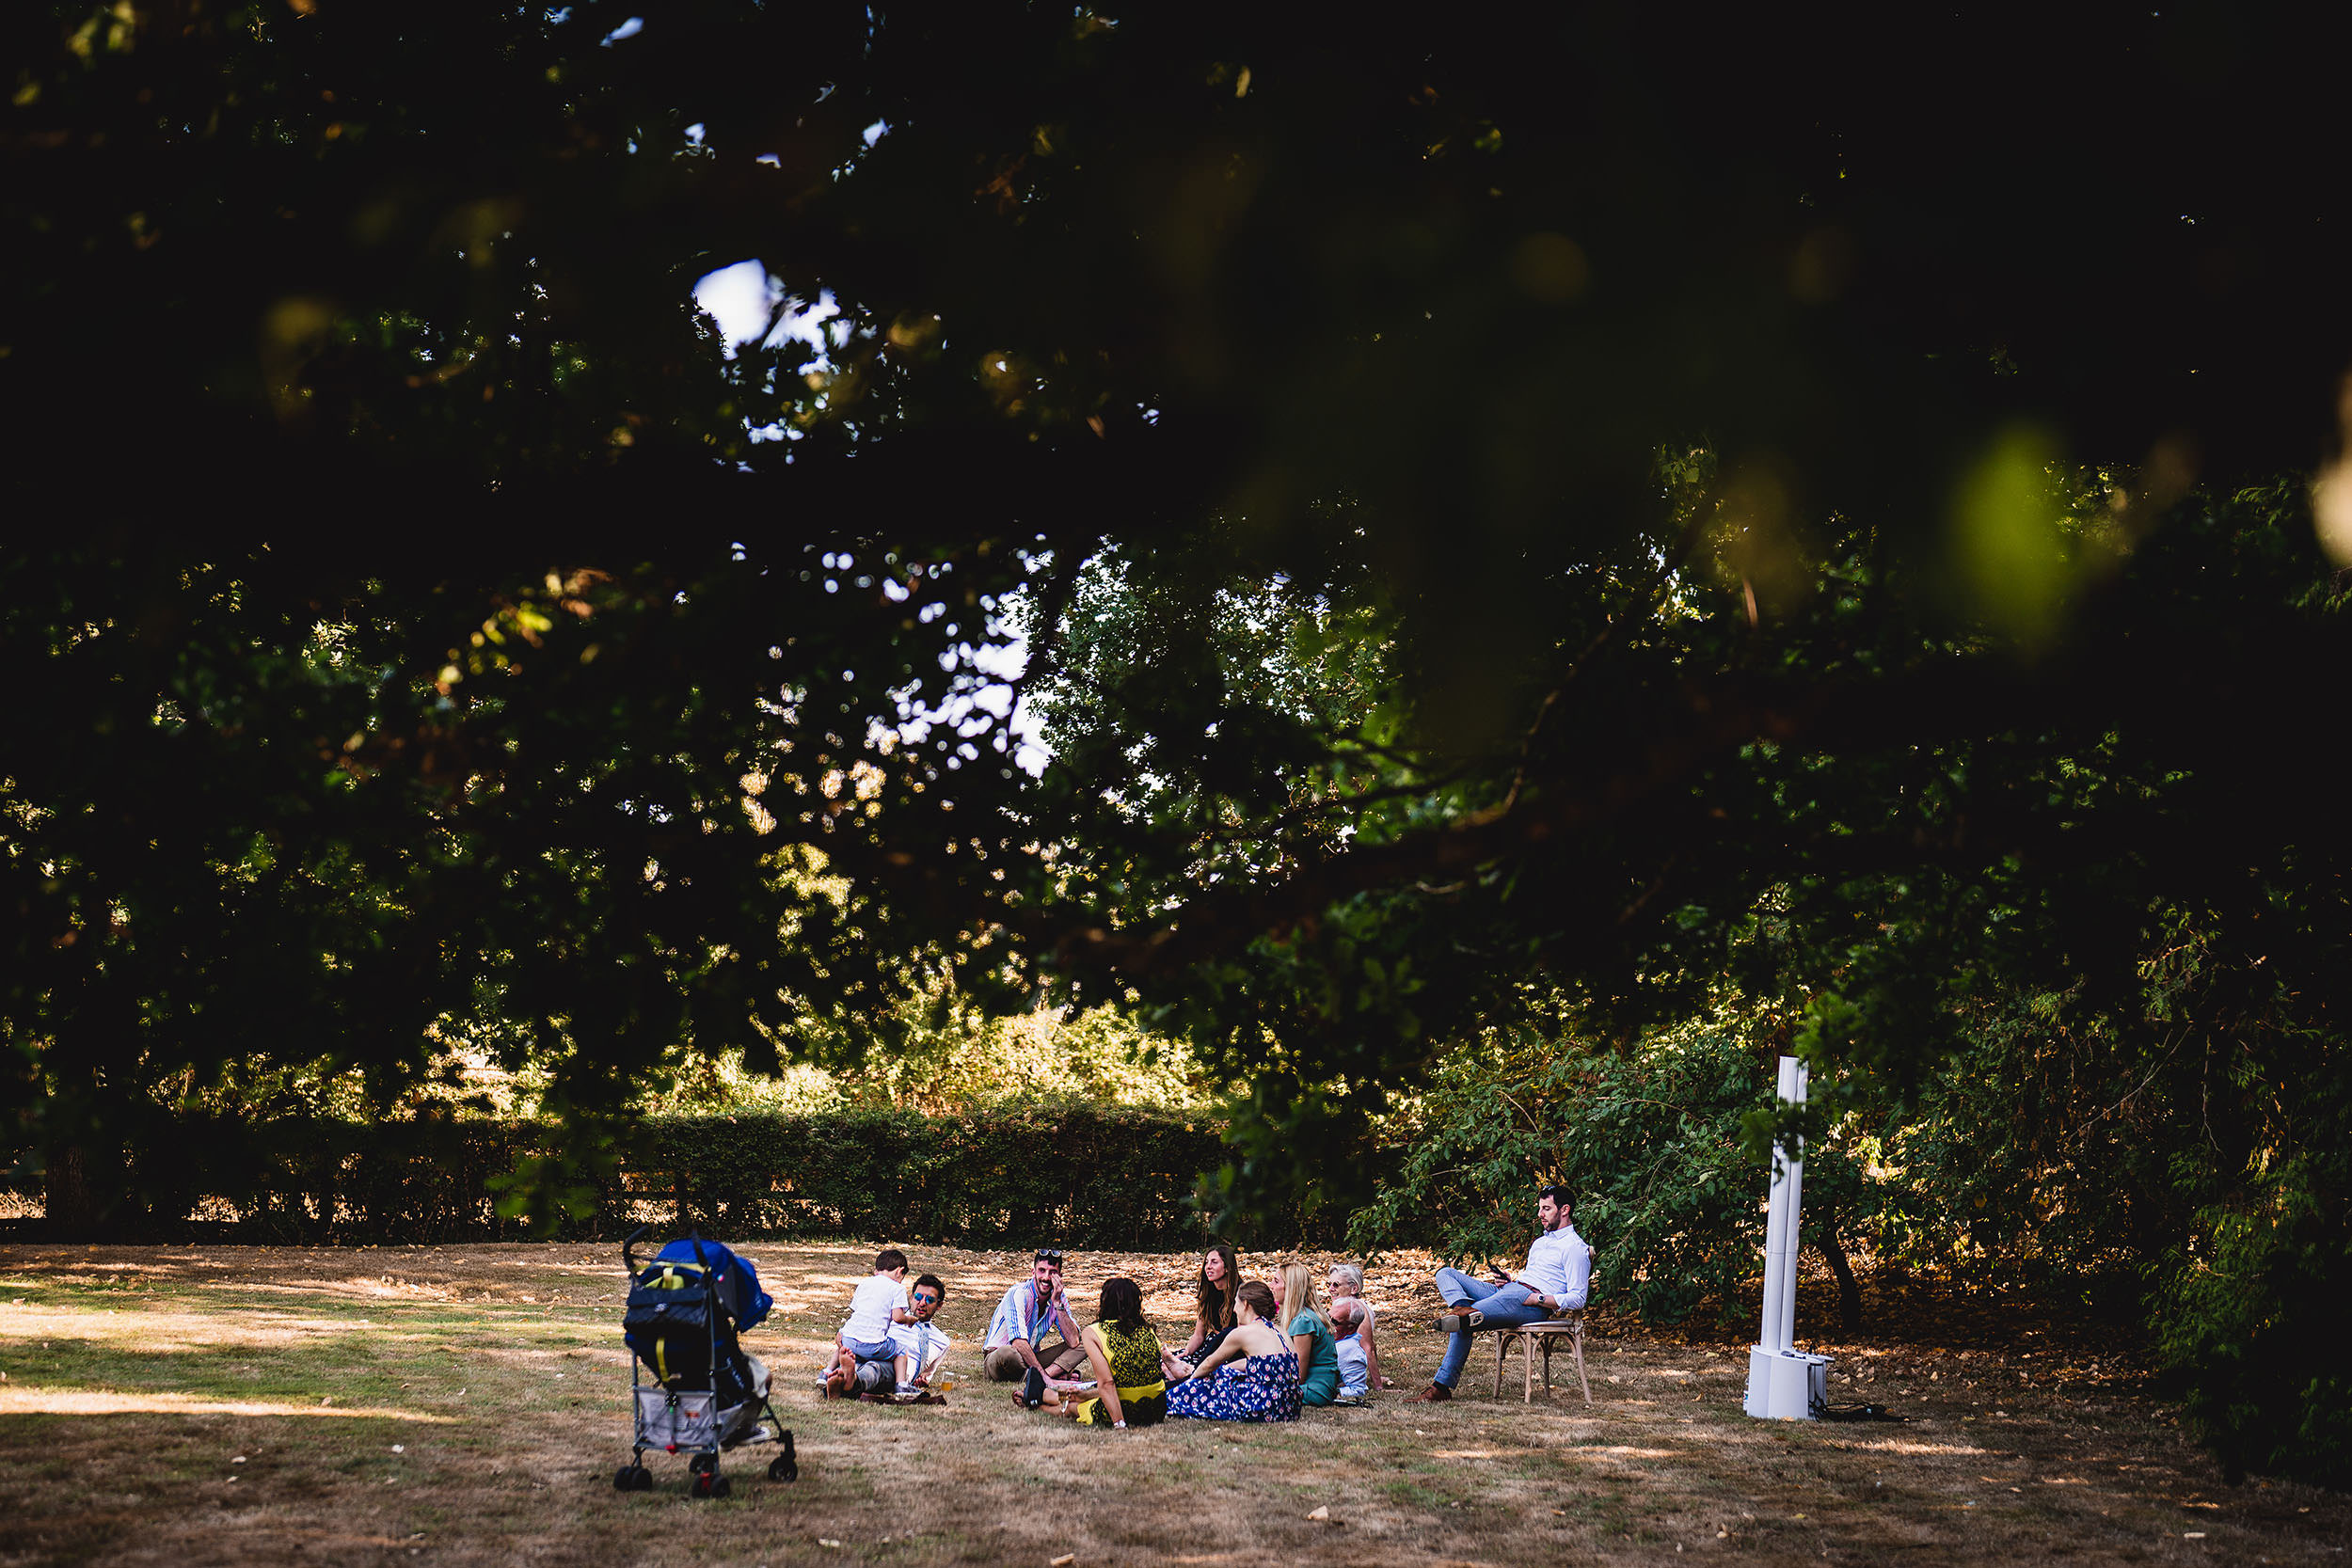 A wedding photographer captures the groom and bride sitting under a tree.